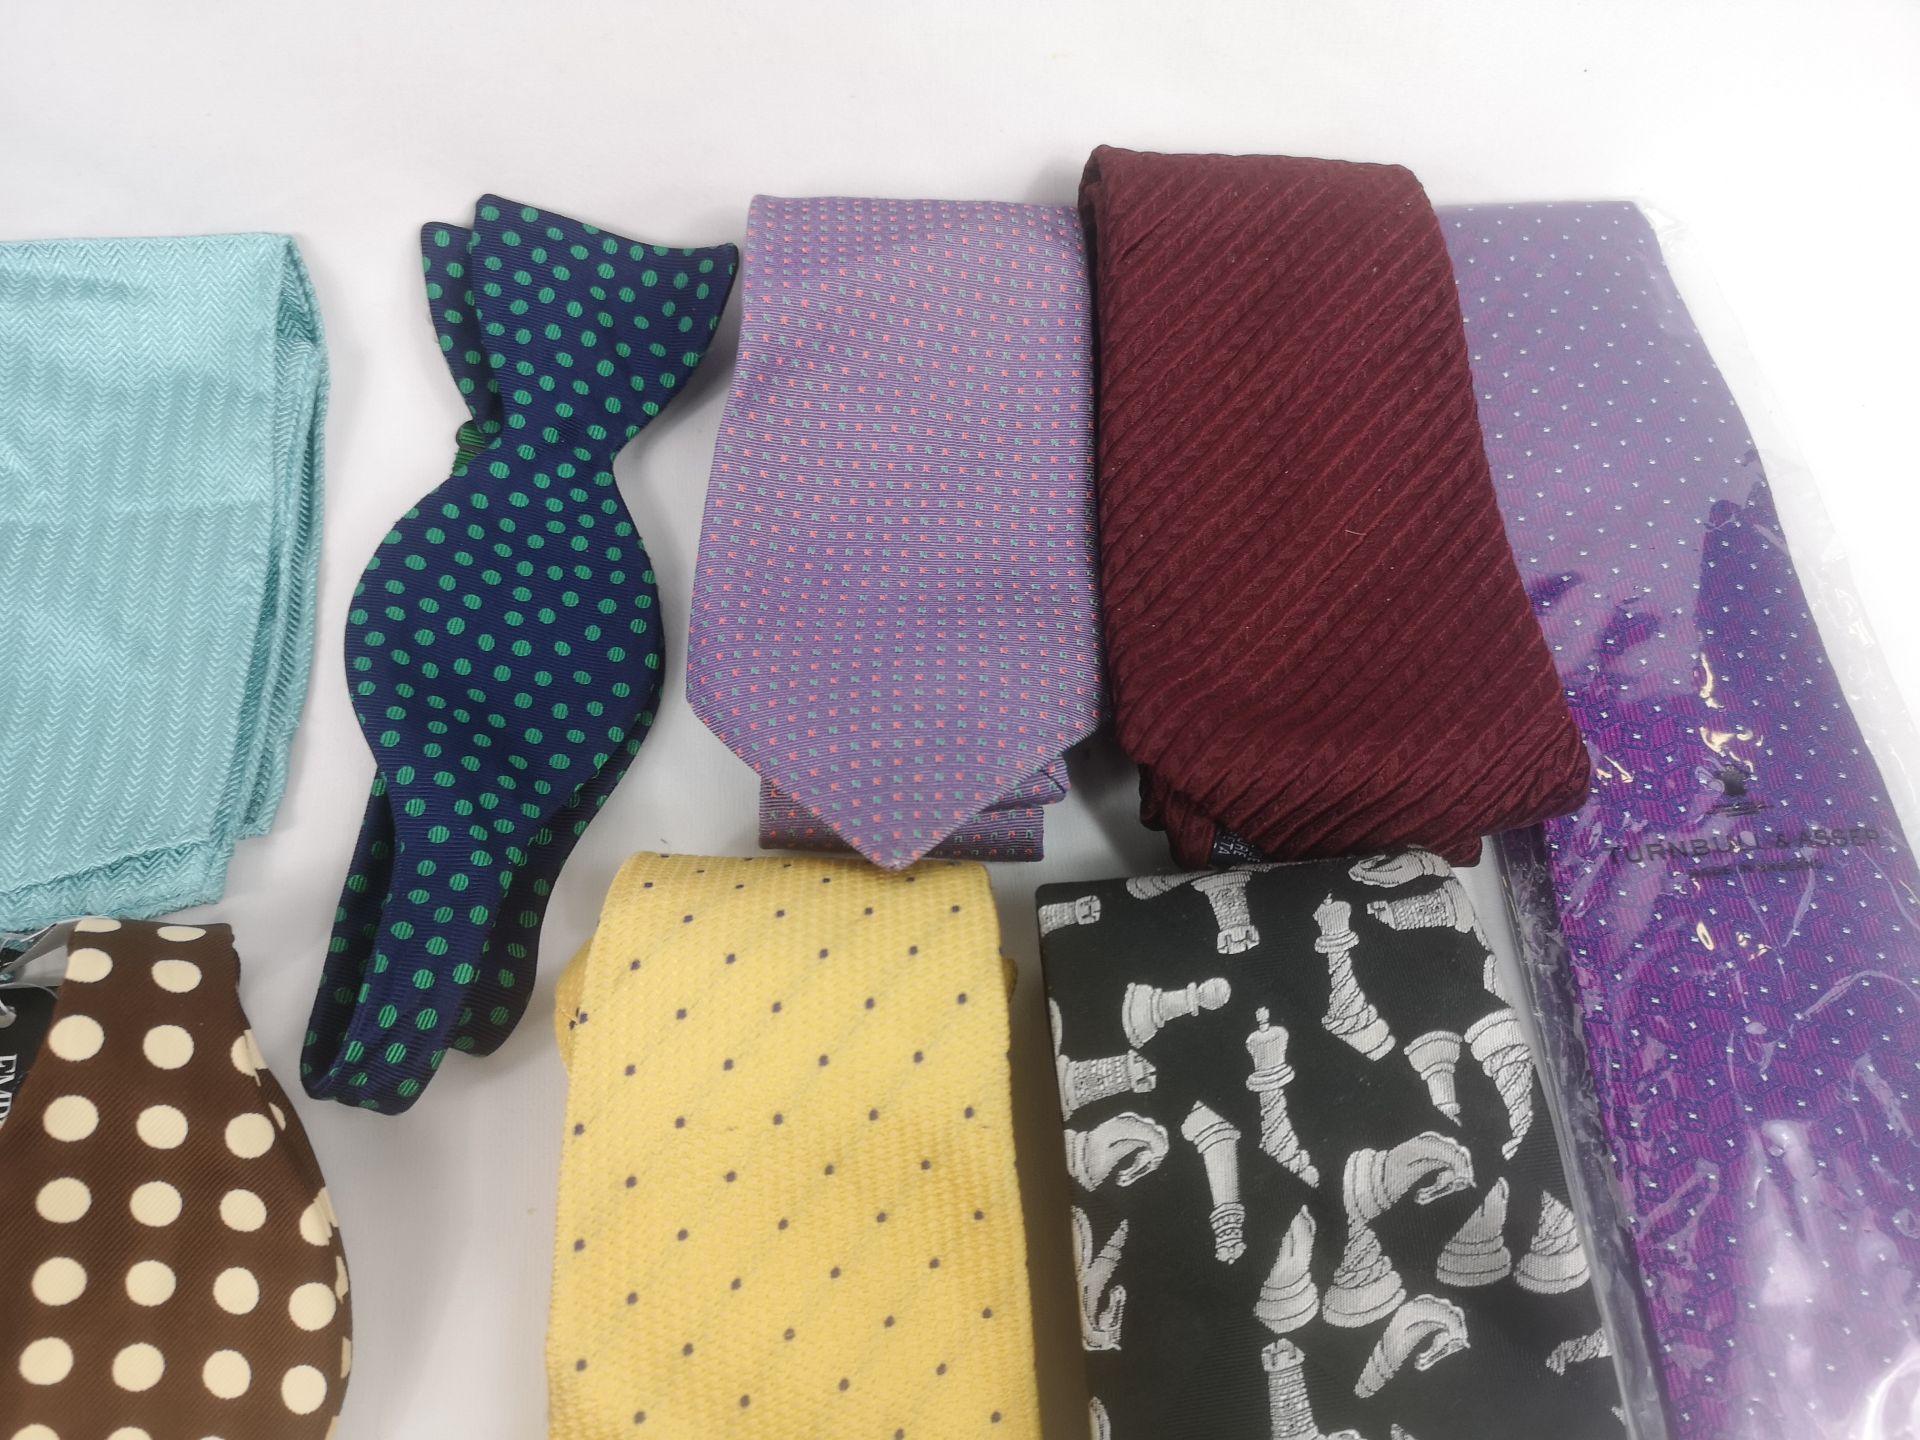 Eight Turnbull and Asser silk ties together with a quantity of Turnbull and Asser bow ties - Image 3 of 6